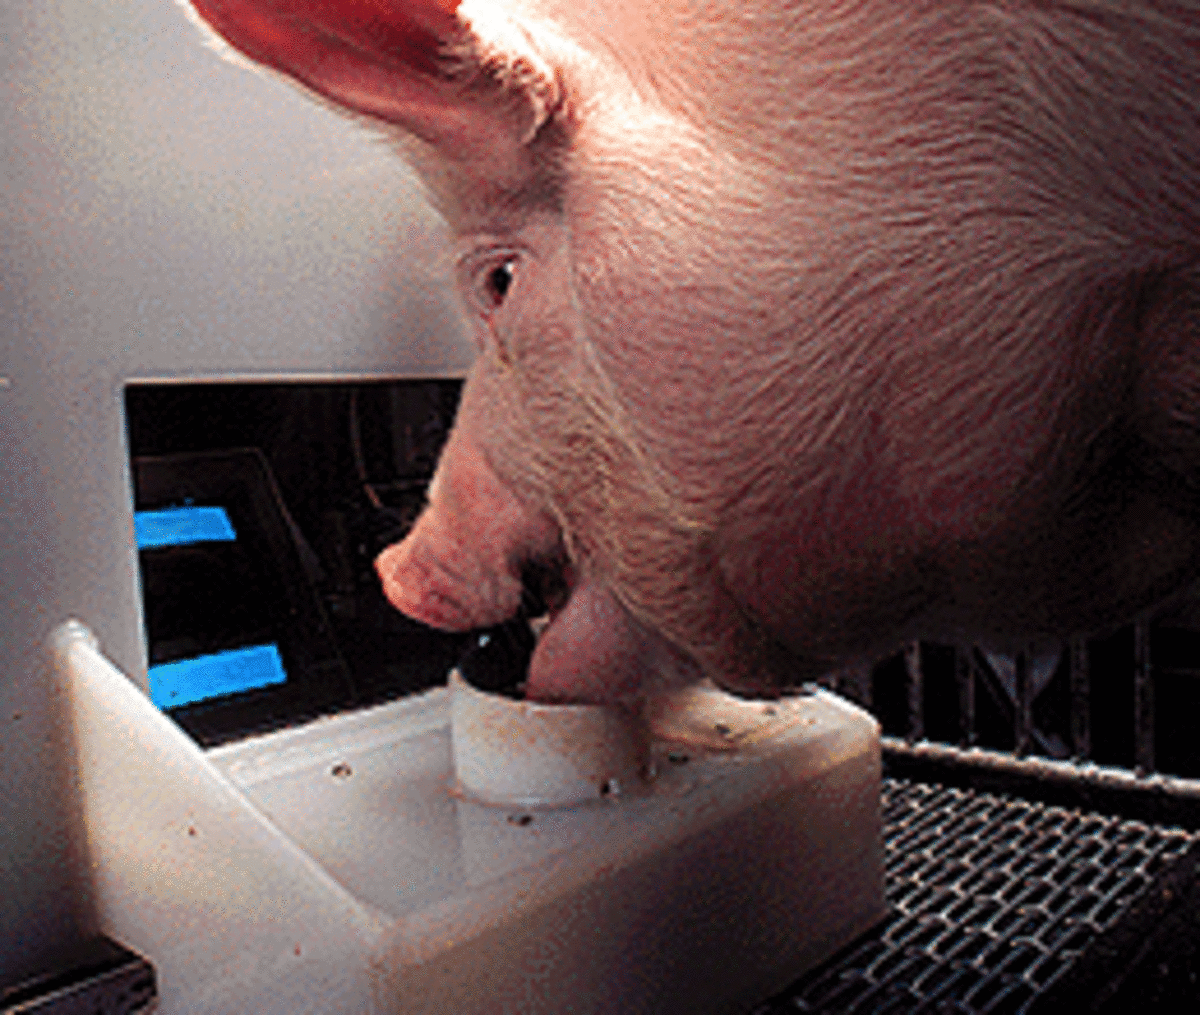 Pig playing computer game using its snout to move joystick, to hit targets on a computer screen with a cursor